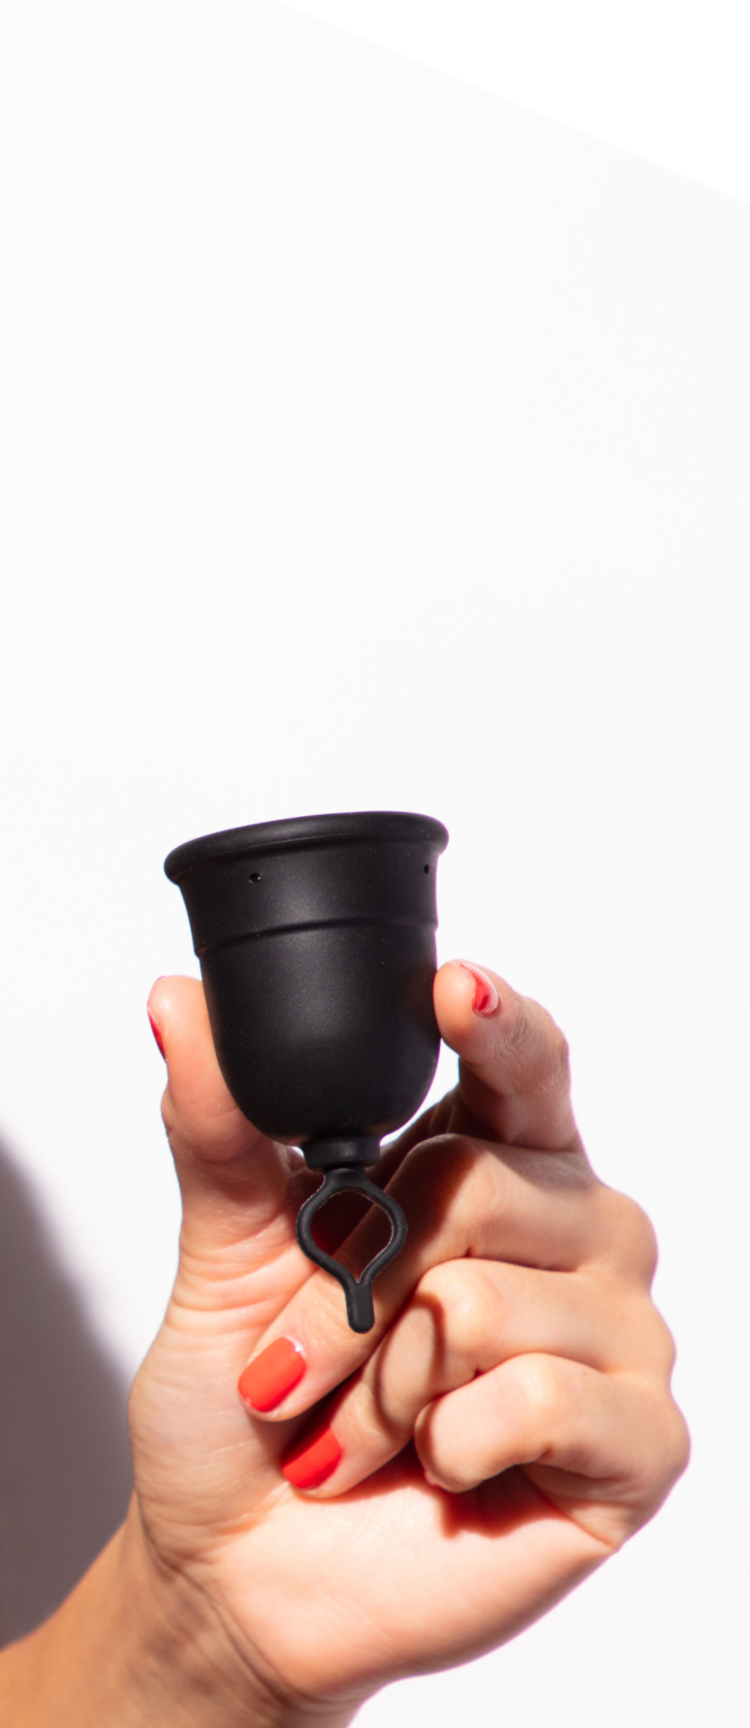 How to Safely Remove a Menstrual Cup: 10 FAQs